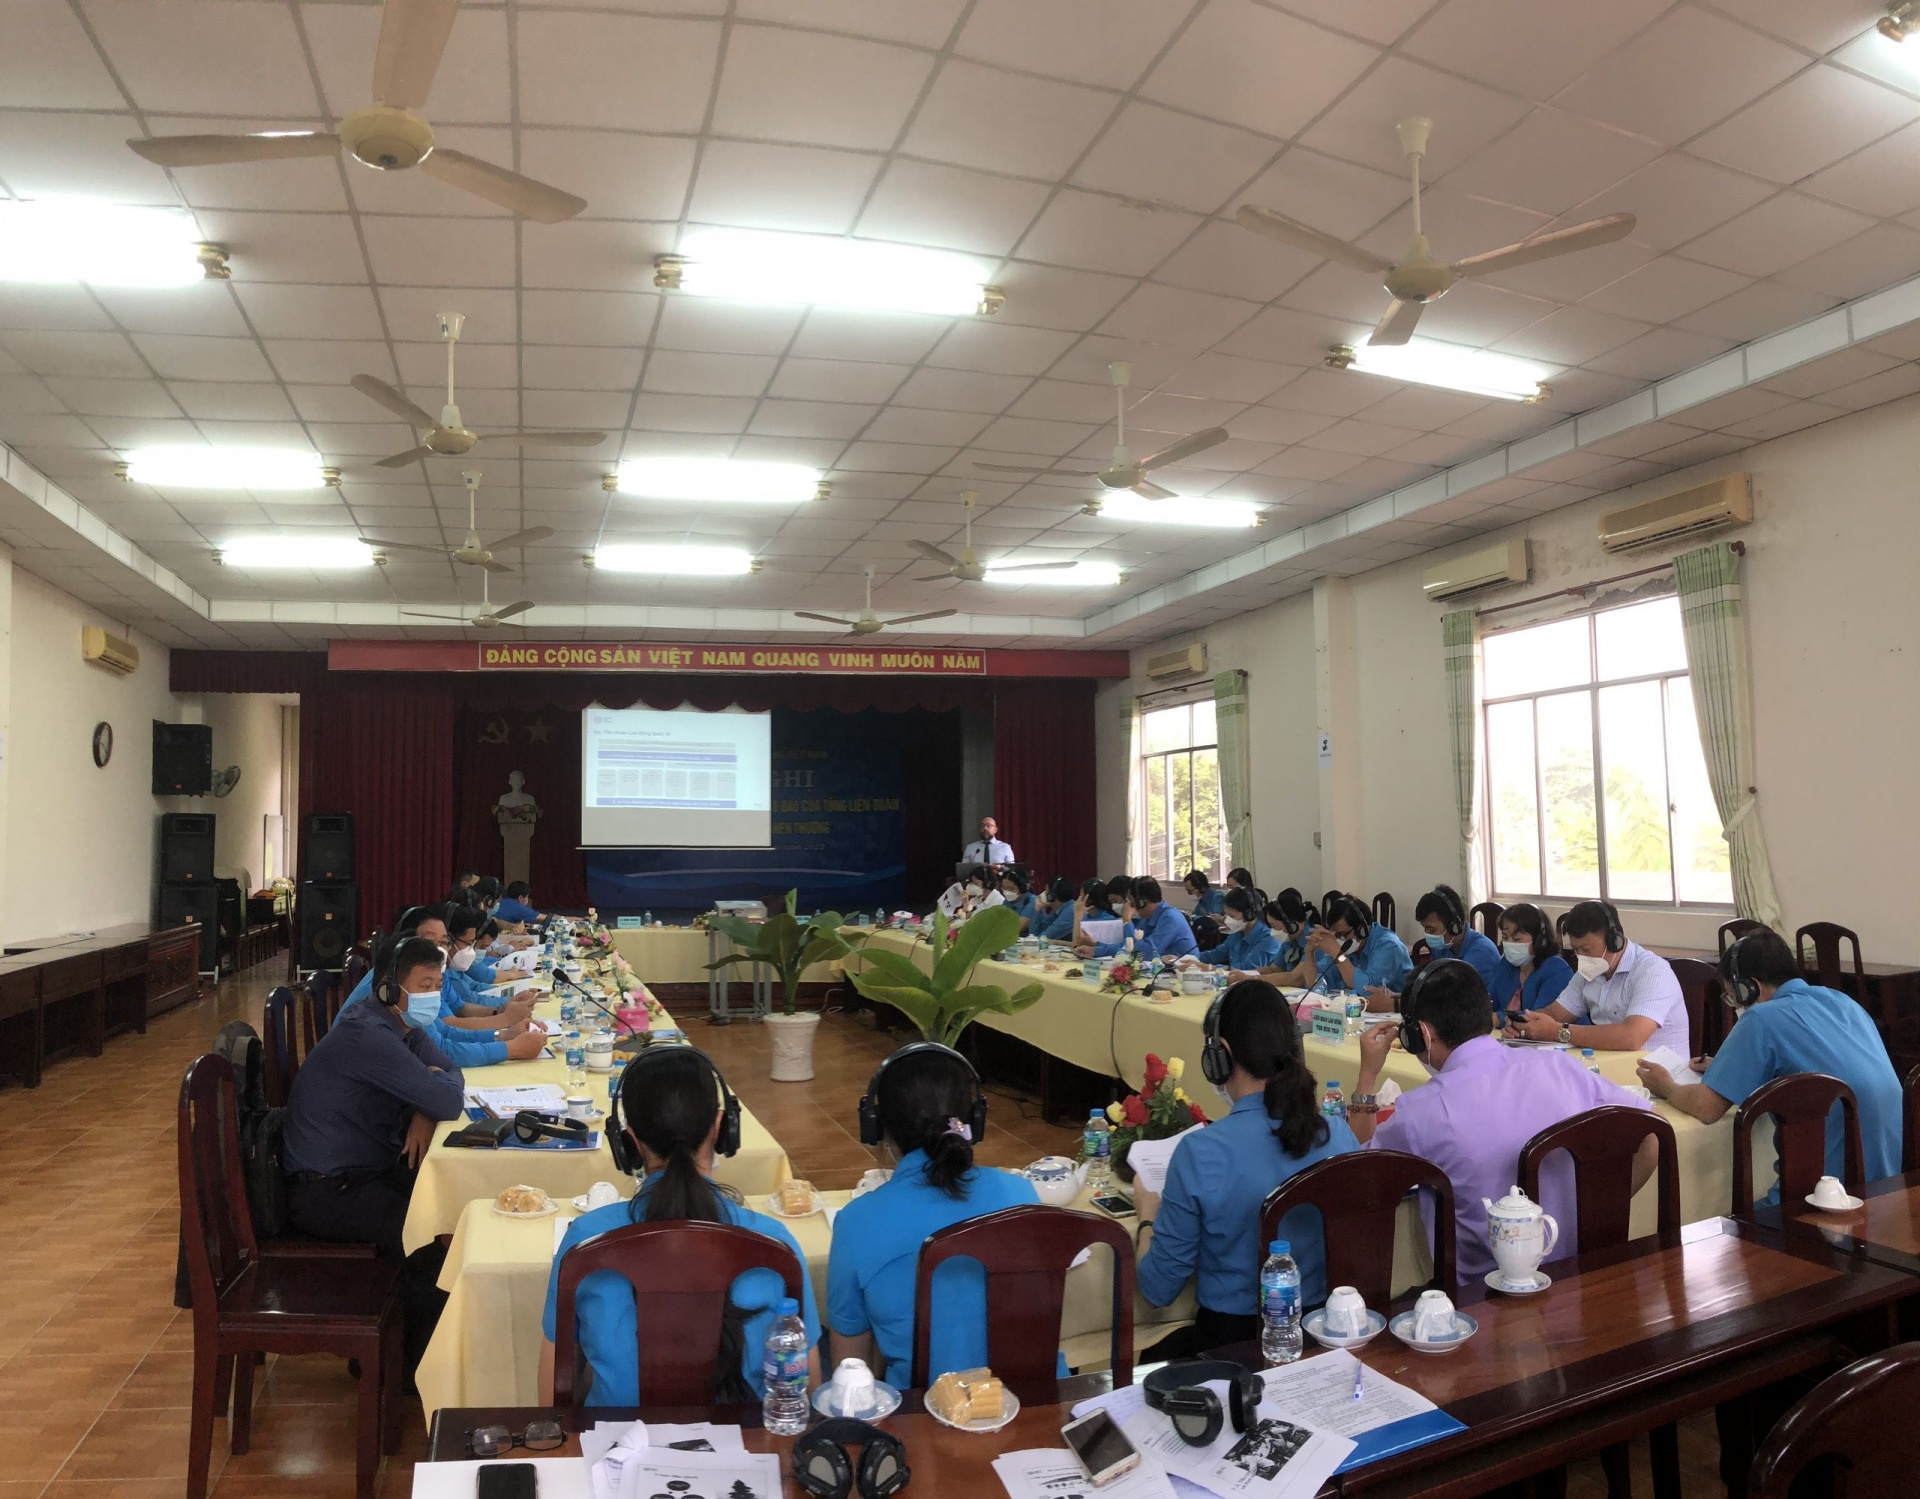 Workers voiced their views during consultations on the law reform organized by the ILO and the Viet Nam General Confederation of Labour.